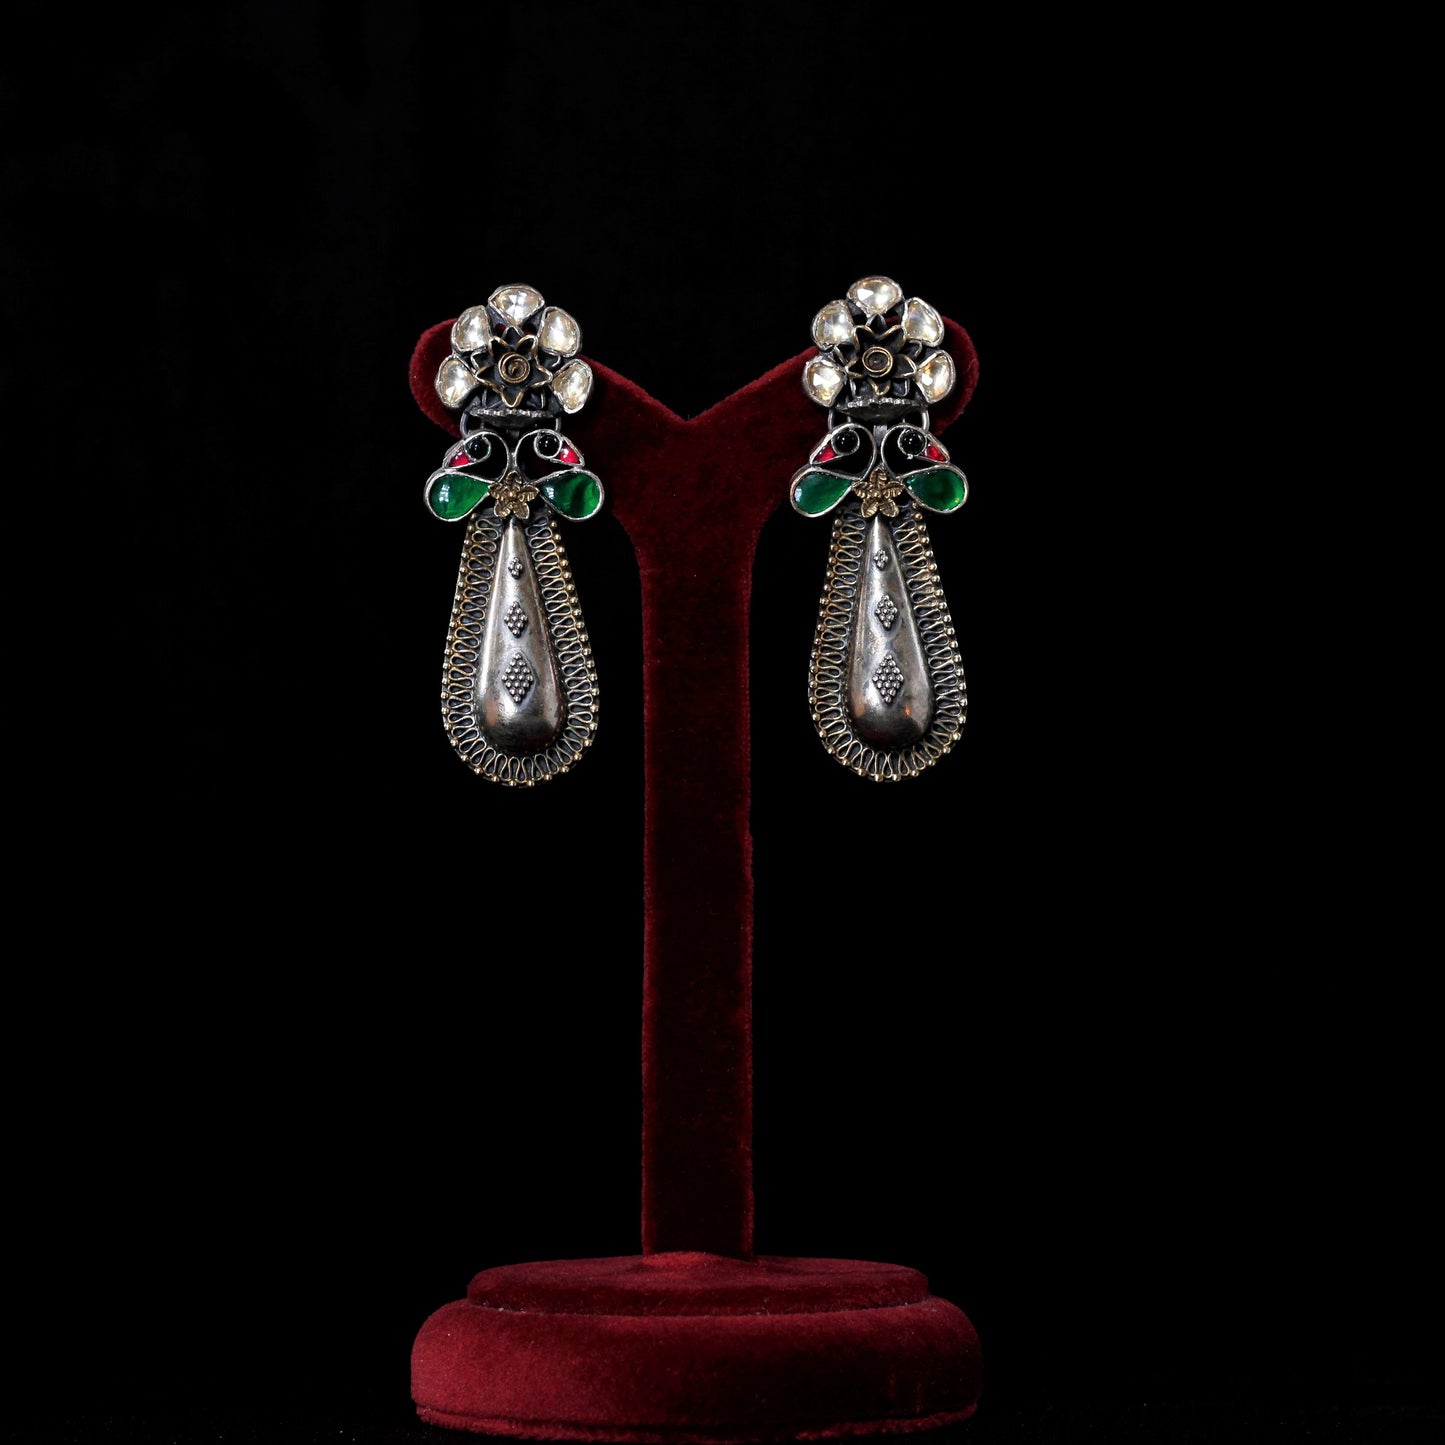 TWO-toned EARRINGS :- 92.5 STERLING SILVER WITH PINK,GREEN & BLACK ONYX WITH CRYSTAL stones.